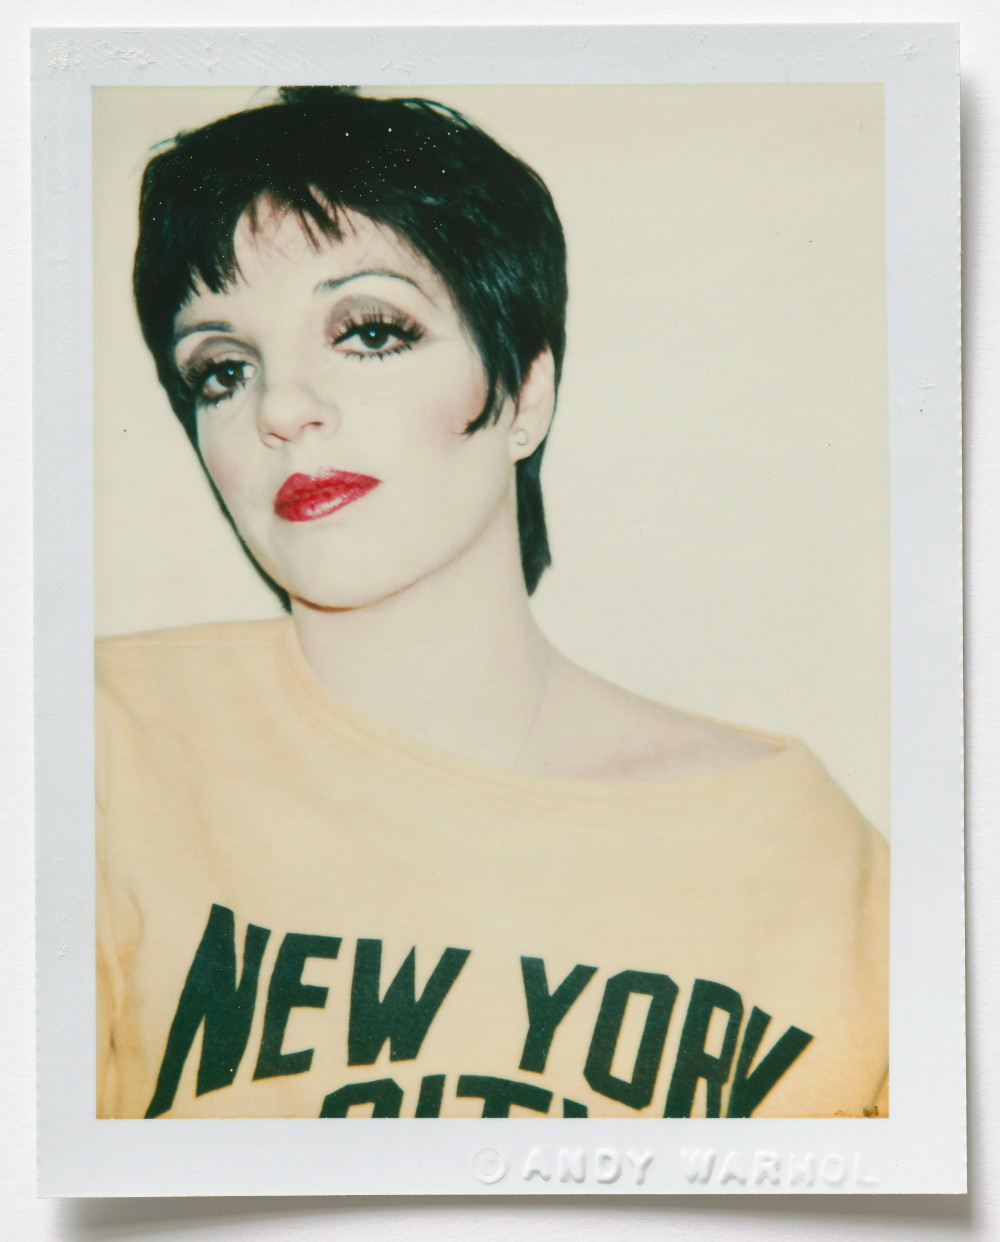 Andy Warhol "Liza Minelli". © 2016 The Andy Warhol Foundation for the Visual Arts, Inc. / Artists Rights Society (ARS), New York, Courtesy Galerie Bastian, Berlin.